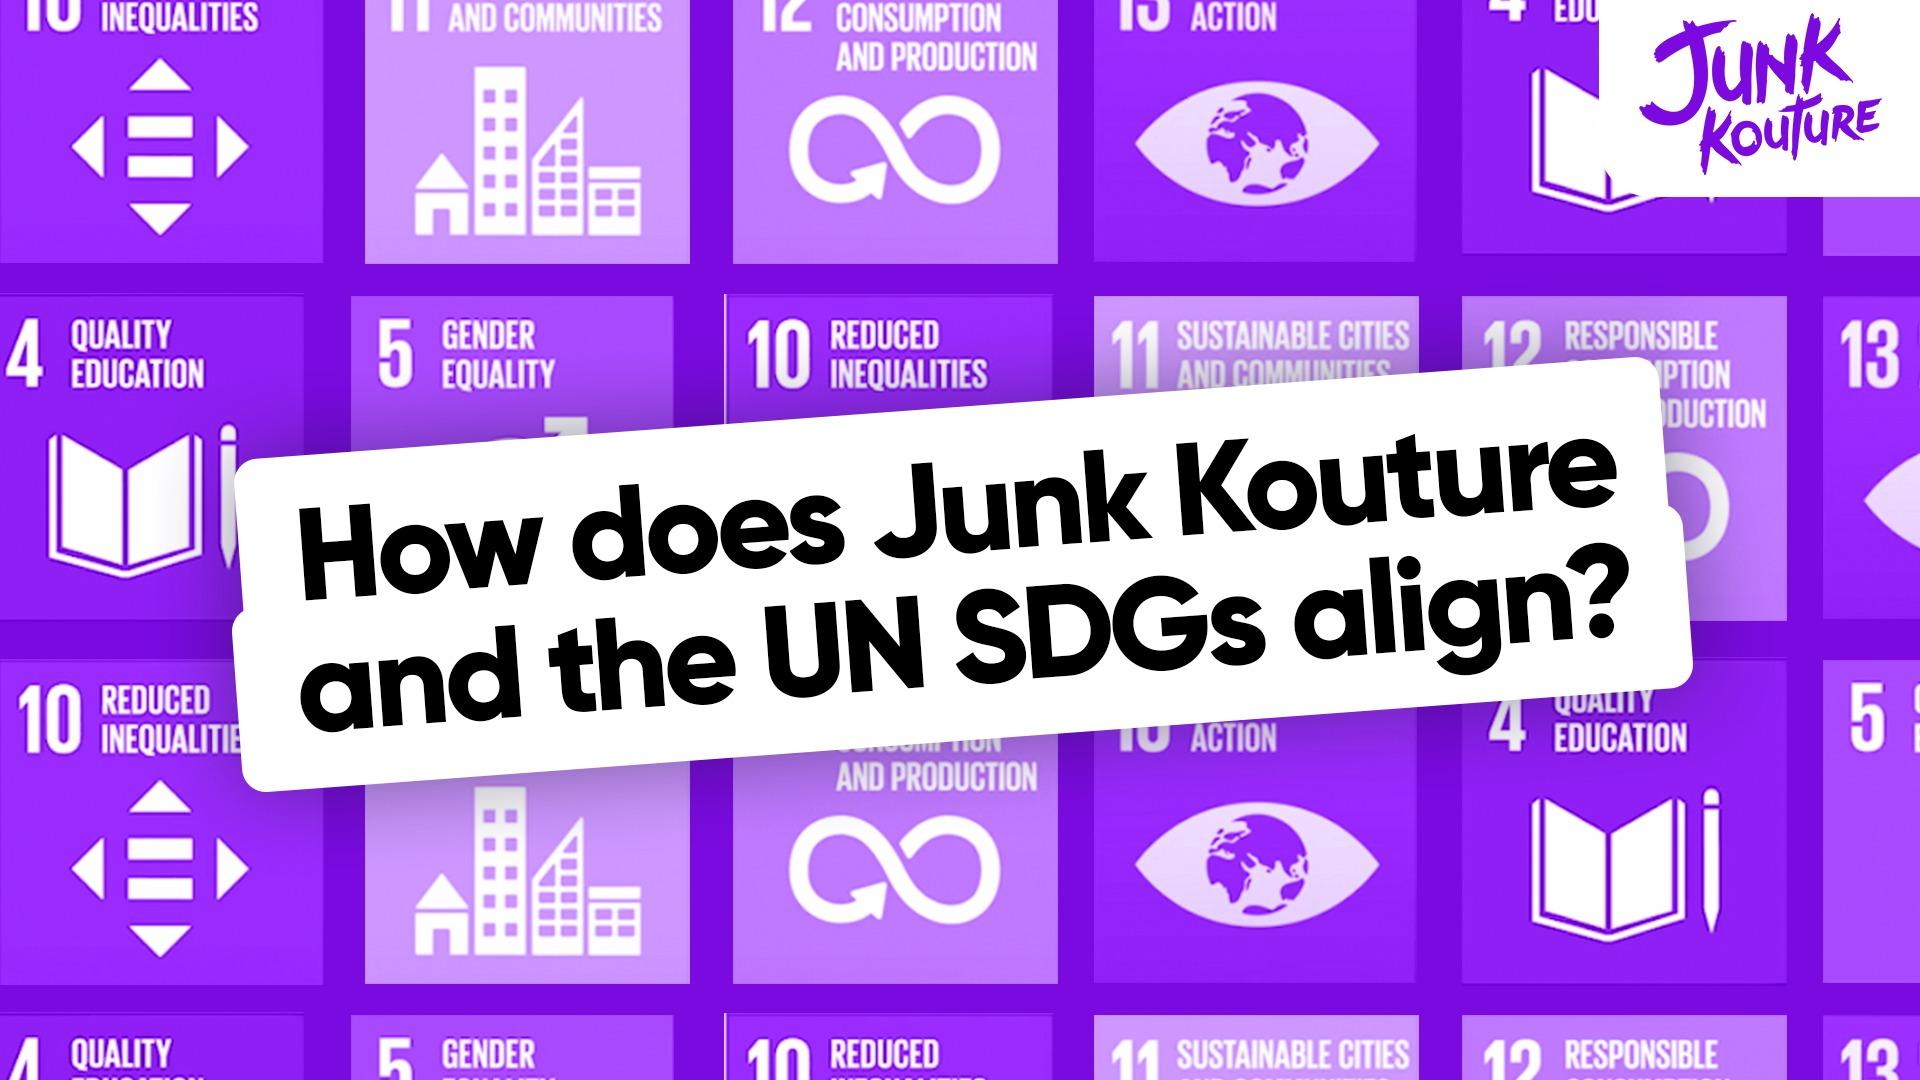  How does Junk Kouture and the UN SDGs align